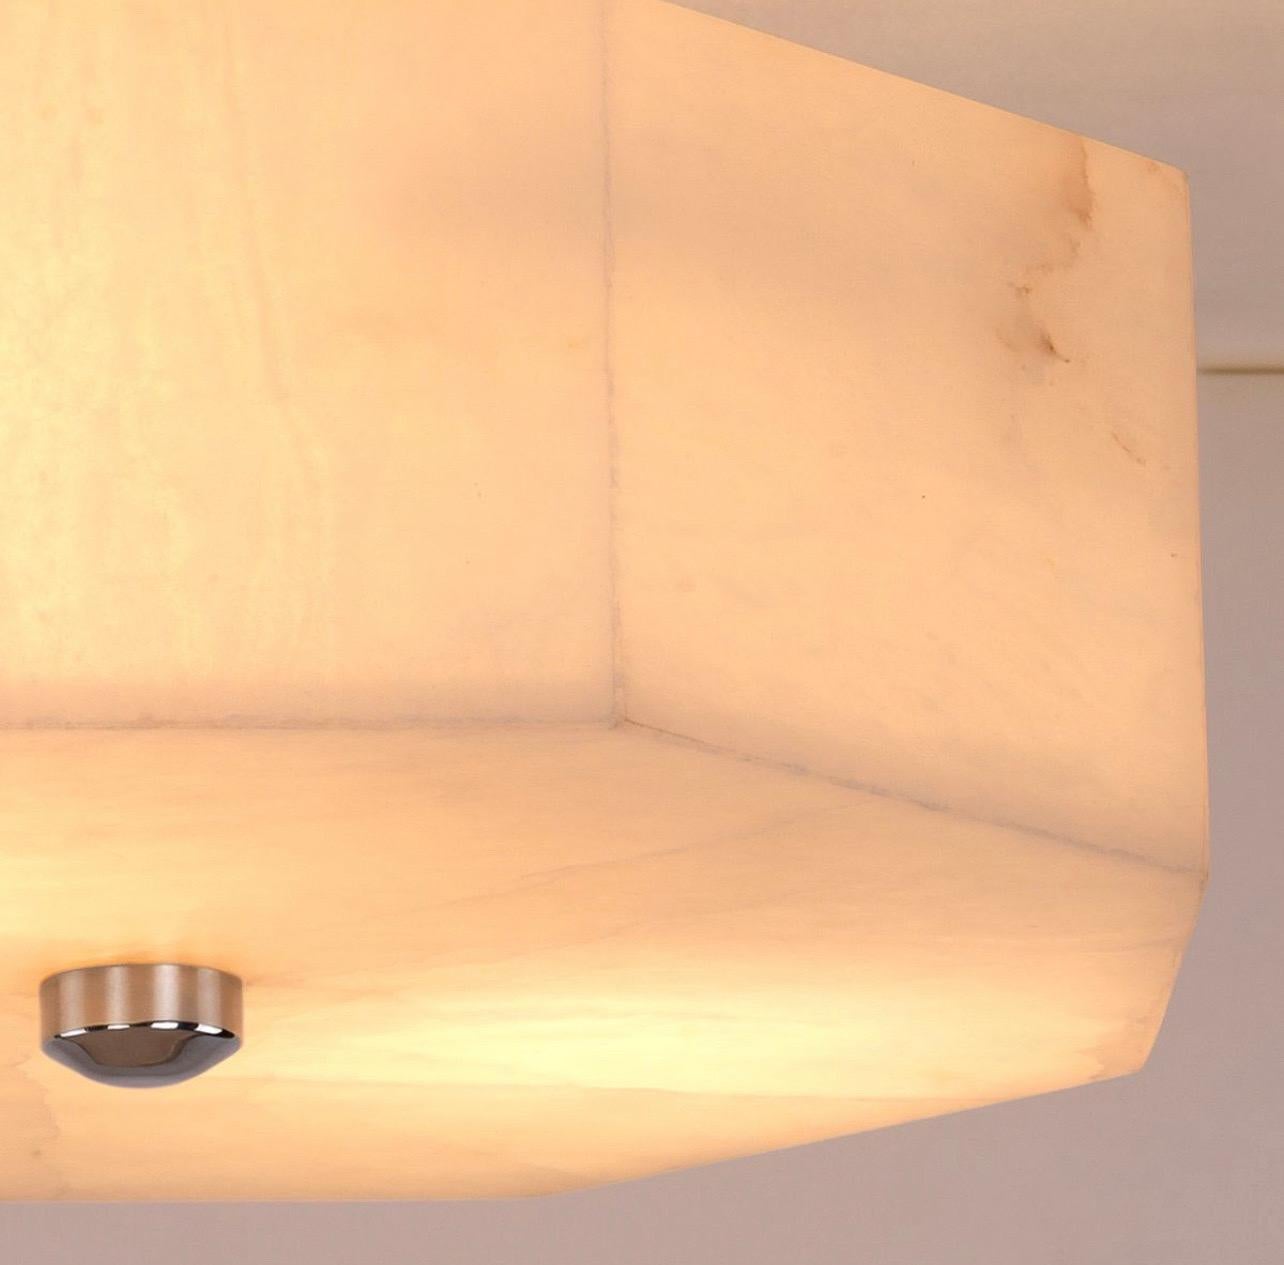 A Wonderful New Vaughan Oakley Alabaster Semi Flush Ceiling Light Fixture With Polished Nickel.

We Have 4 New Fixtures Available
Each Sold Separately.